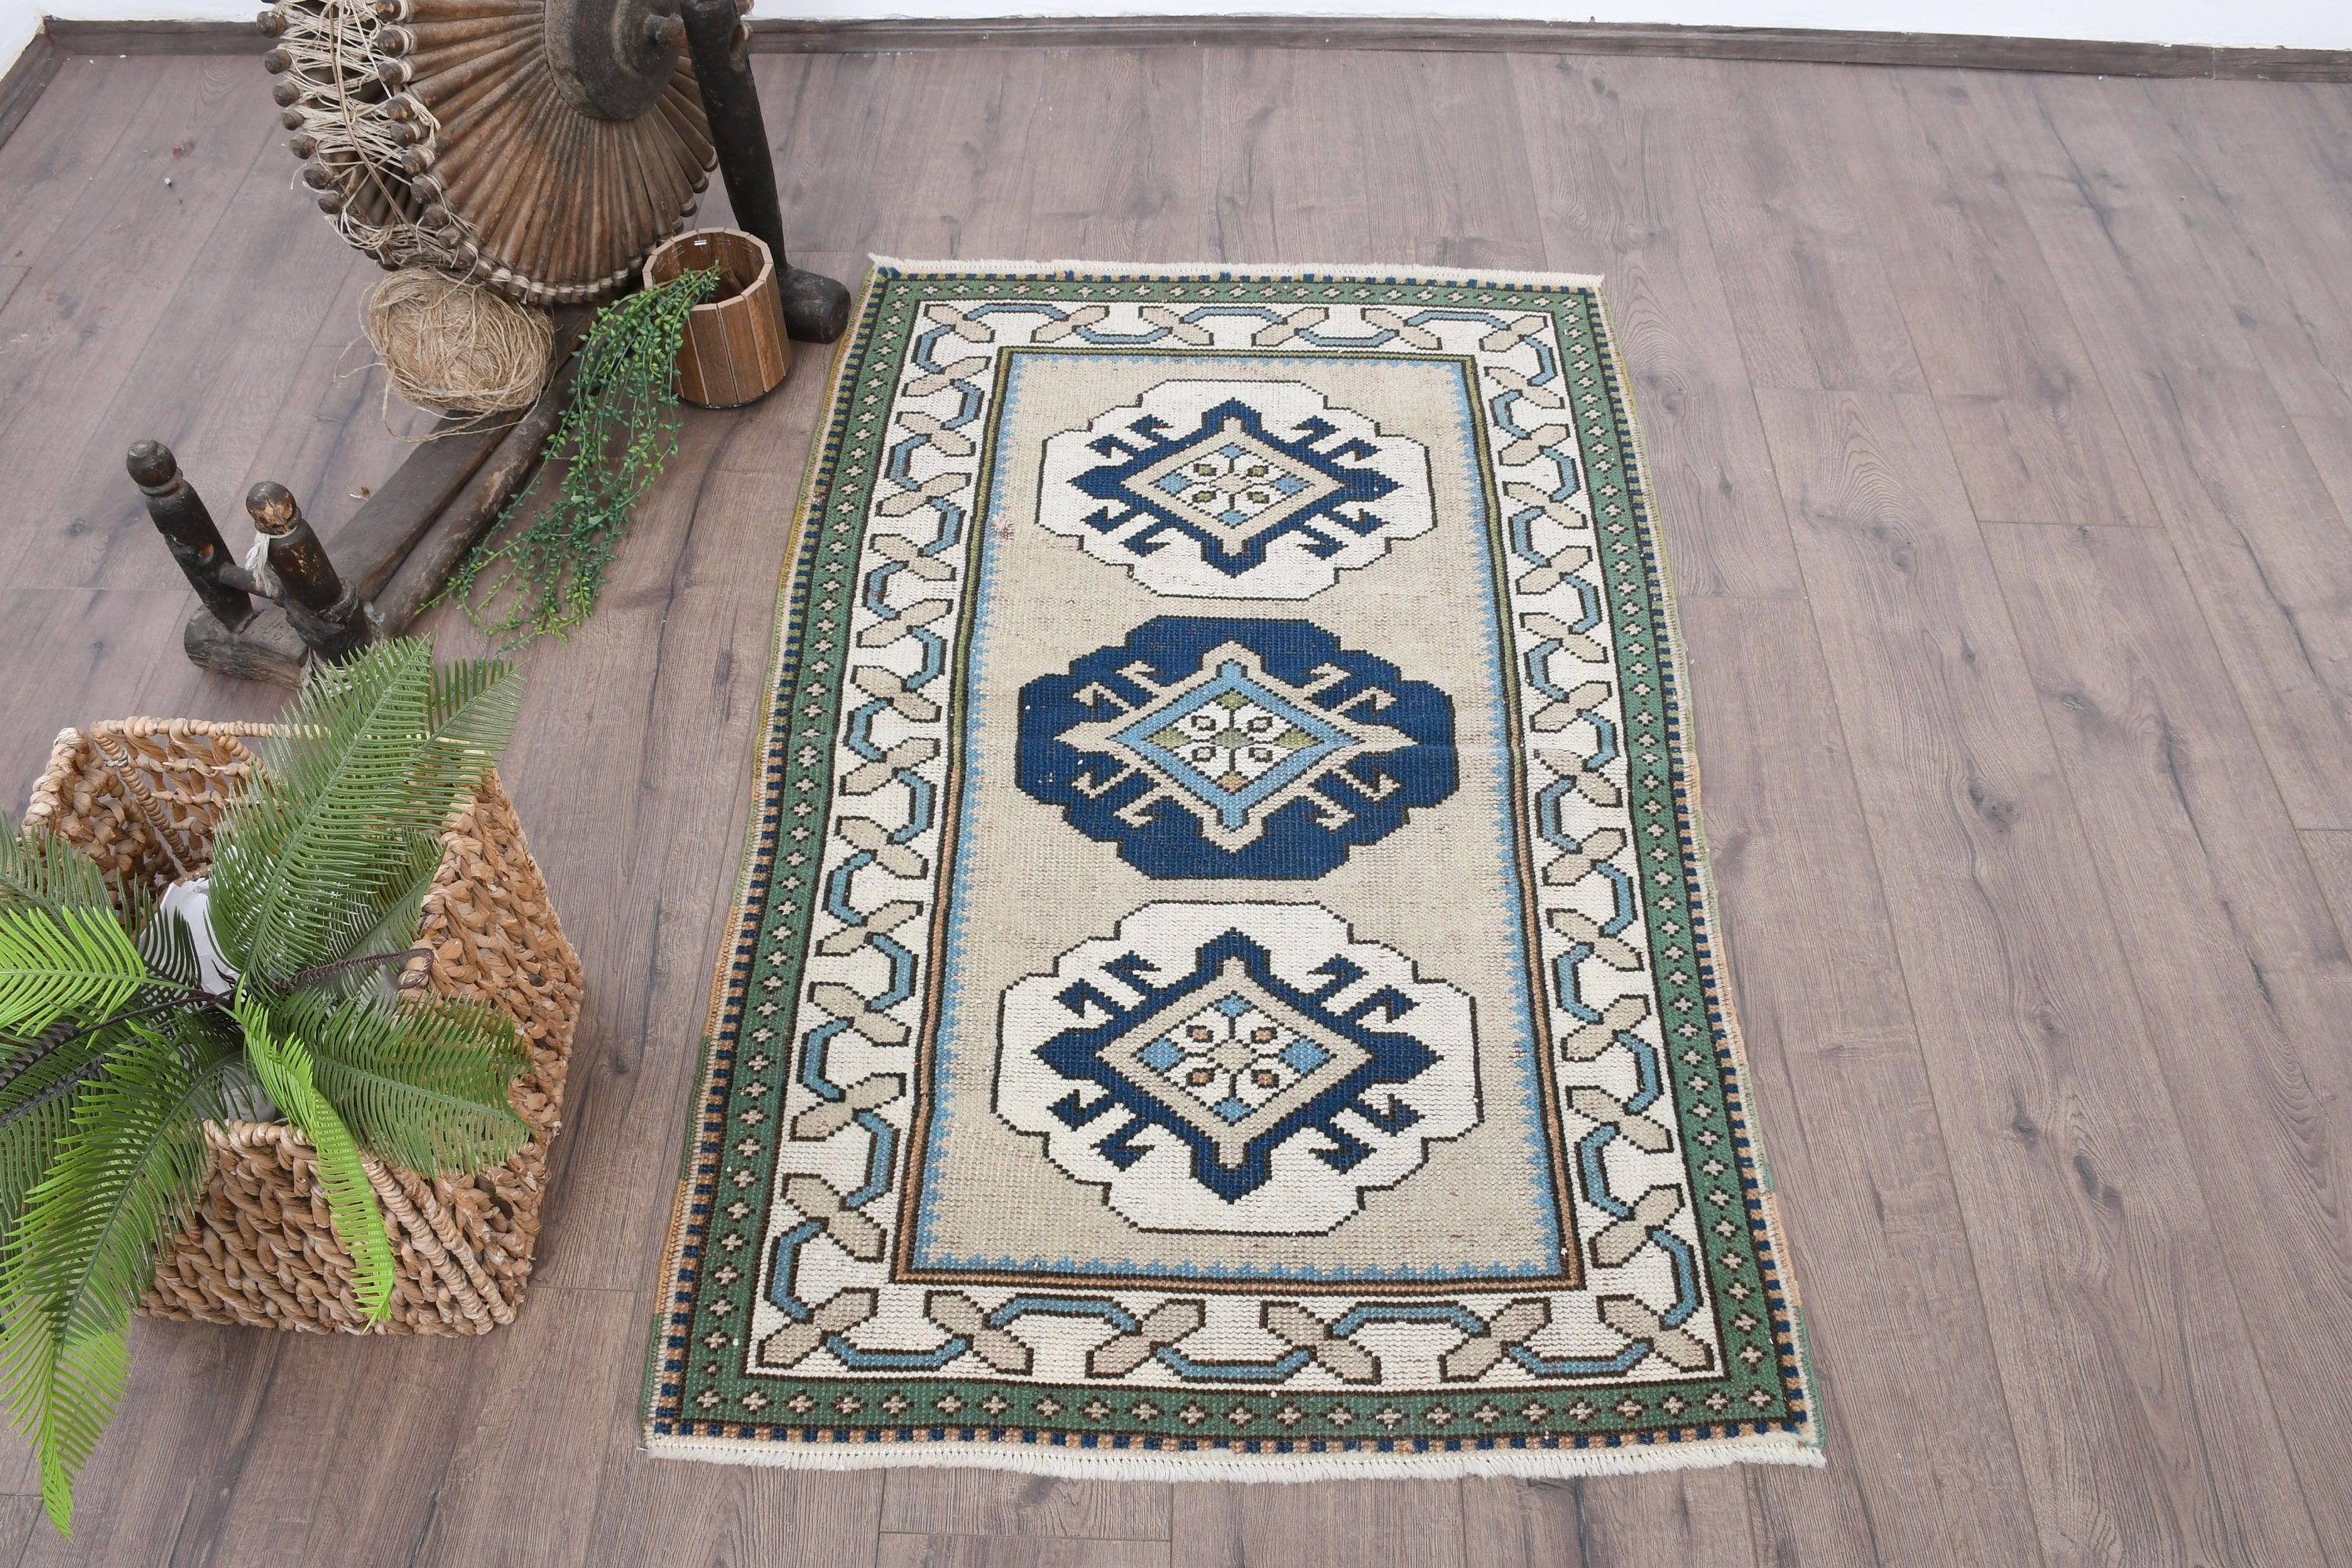 Bath Rug, Turkish Rugs, Kitchen Rug, 2.6x4.2 ft Small Rugs, Vintage Rugs, Antique Rug, Rugs for Bathroom, Wool Rugs, Green Oushak Rug